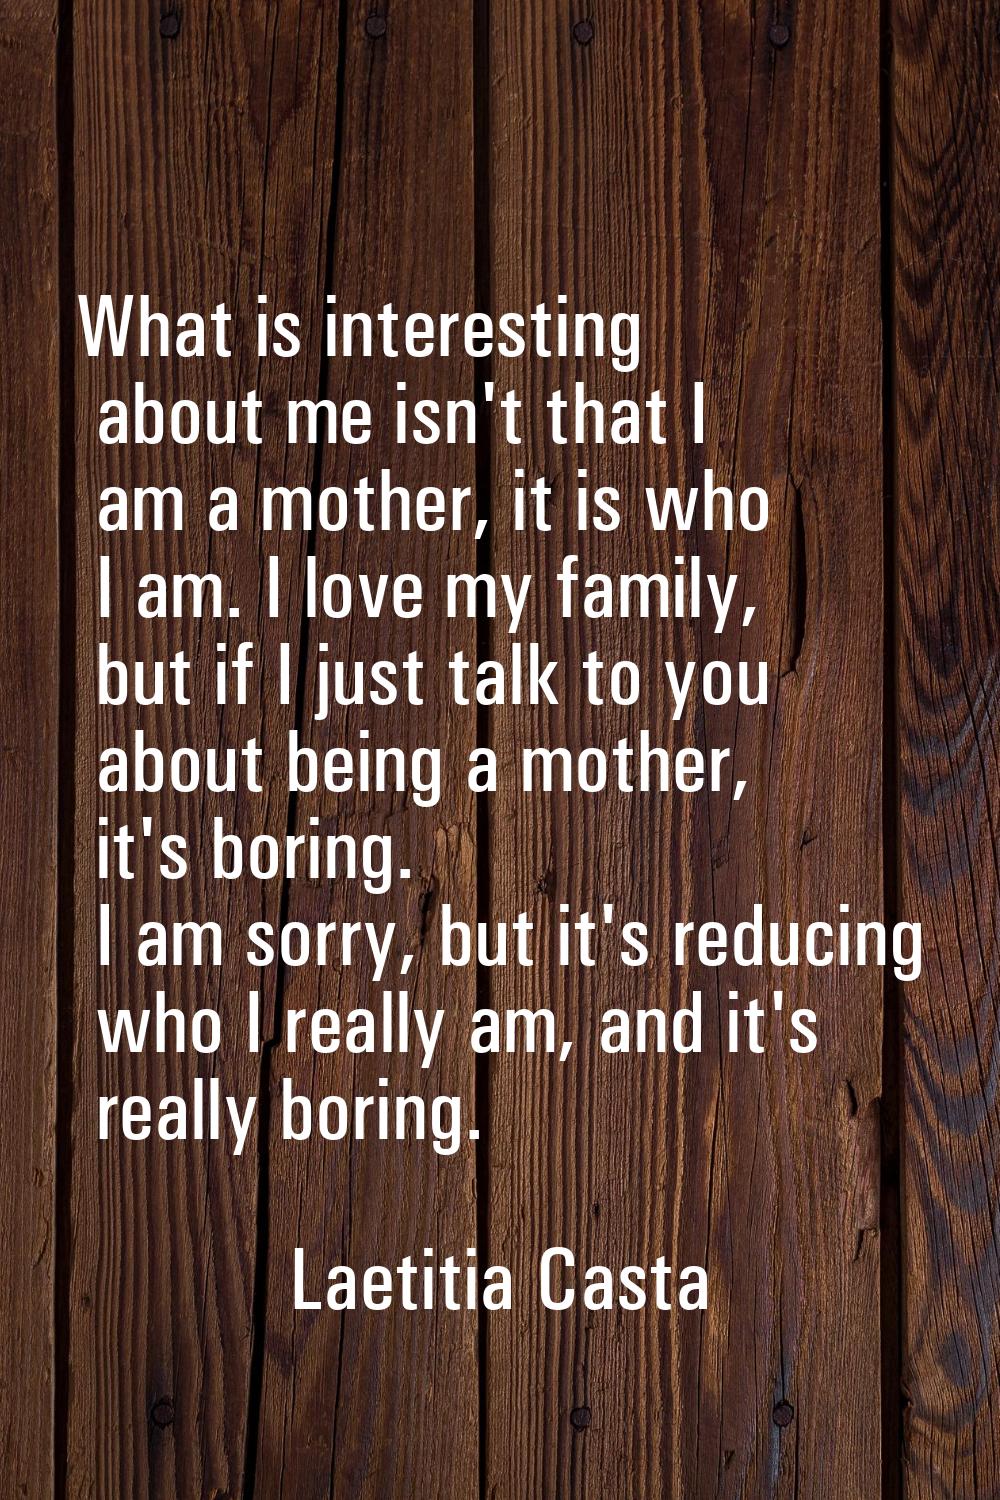 What is interesting about me isn't that I am a mother, it is who I am. I love my family, but if I j